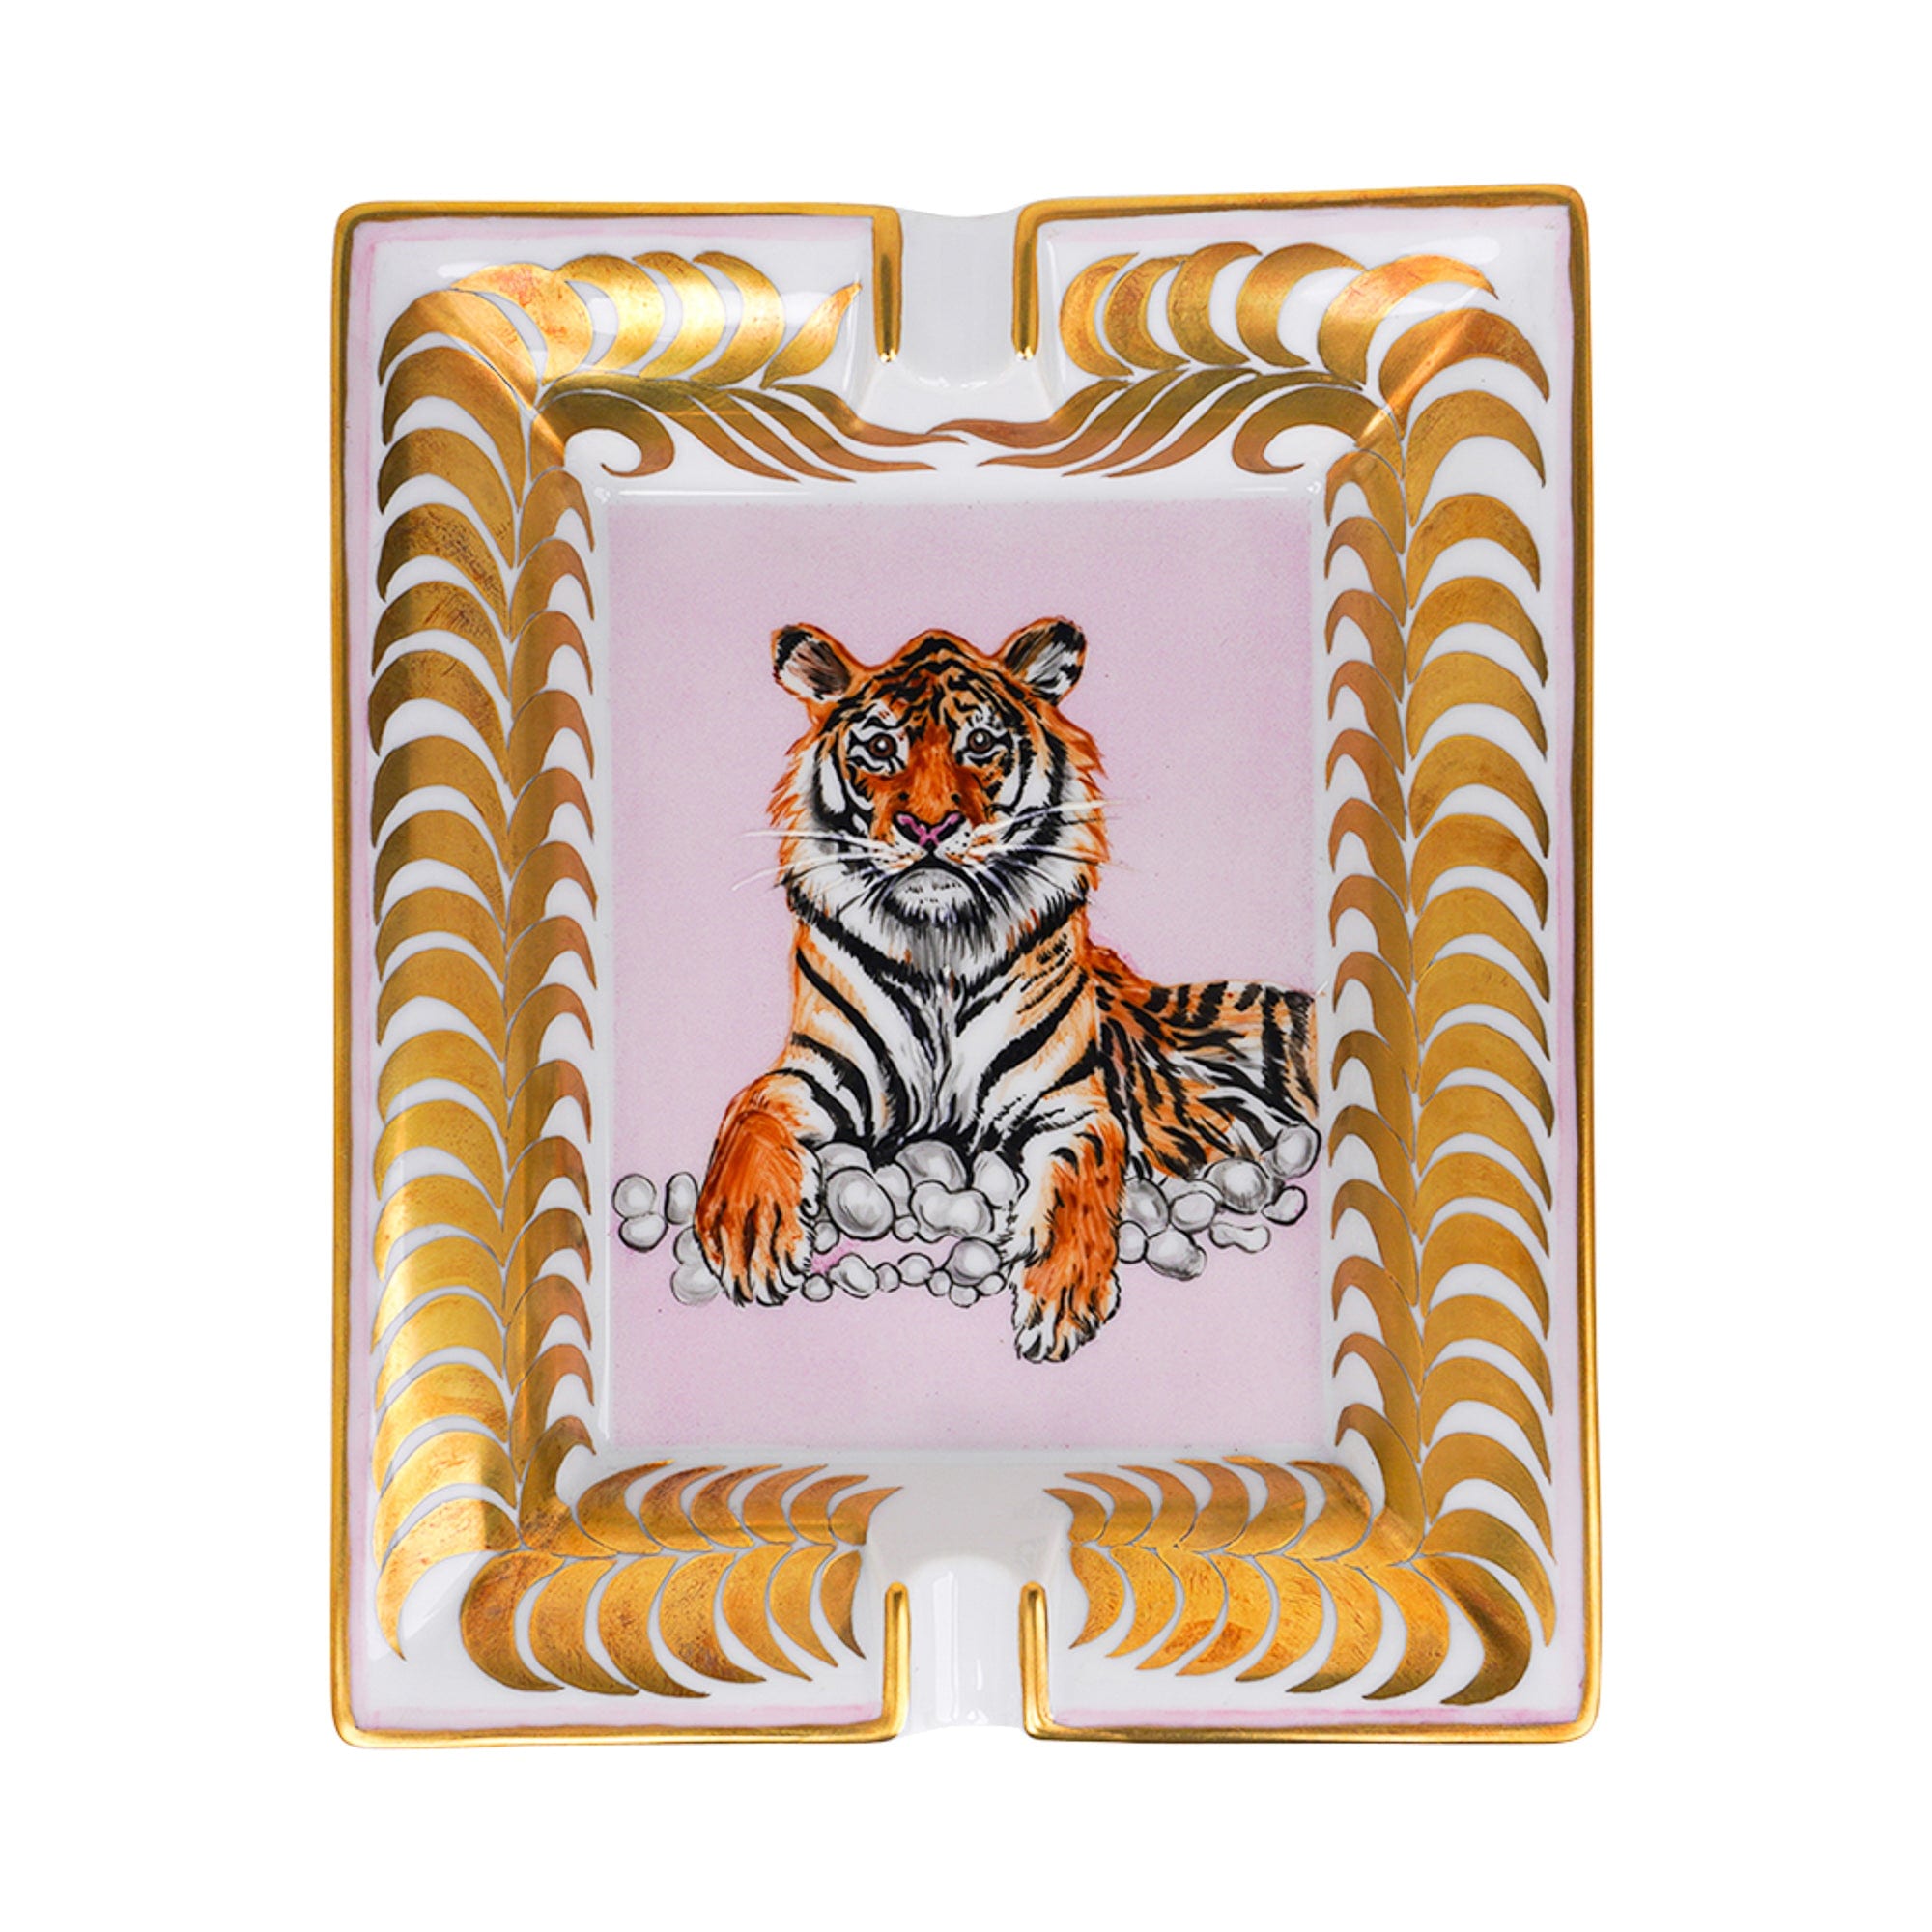 Hermes Change Tray Tigre Royal Or / Rose Hand Painted